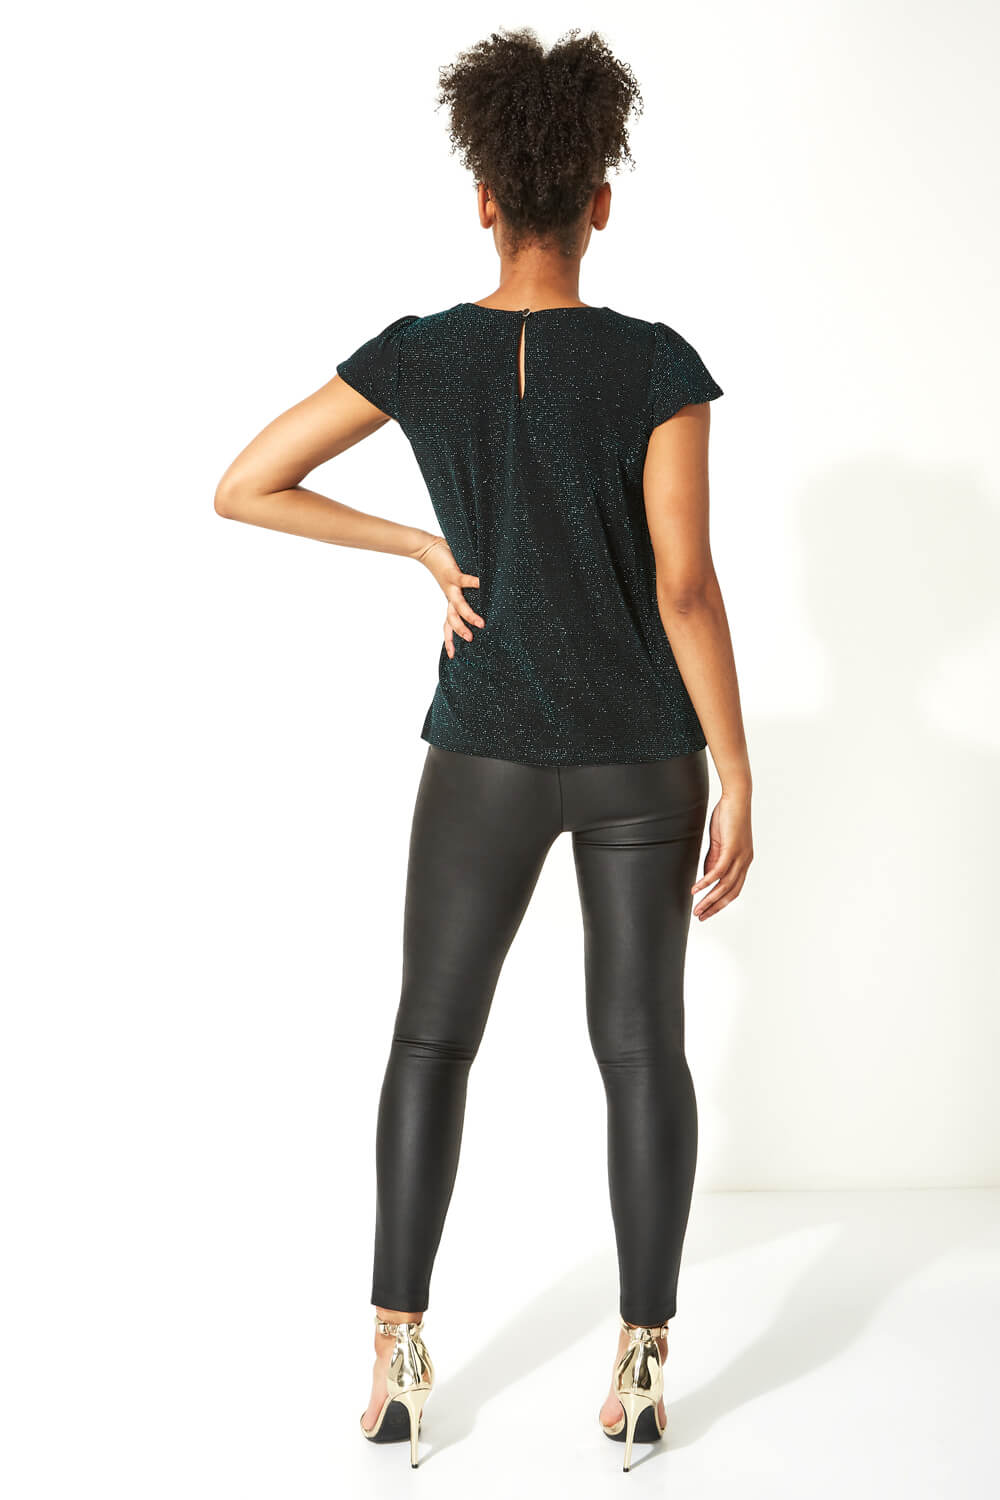 Green Shimmer Pleat Neck Top, Image 3 of 5